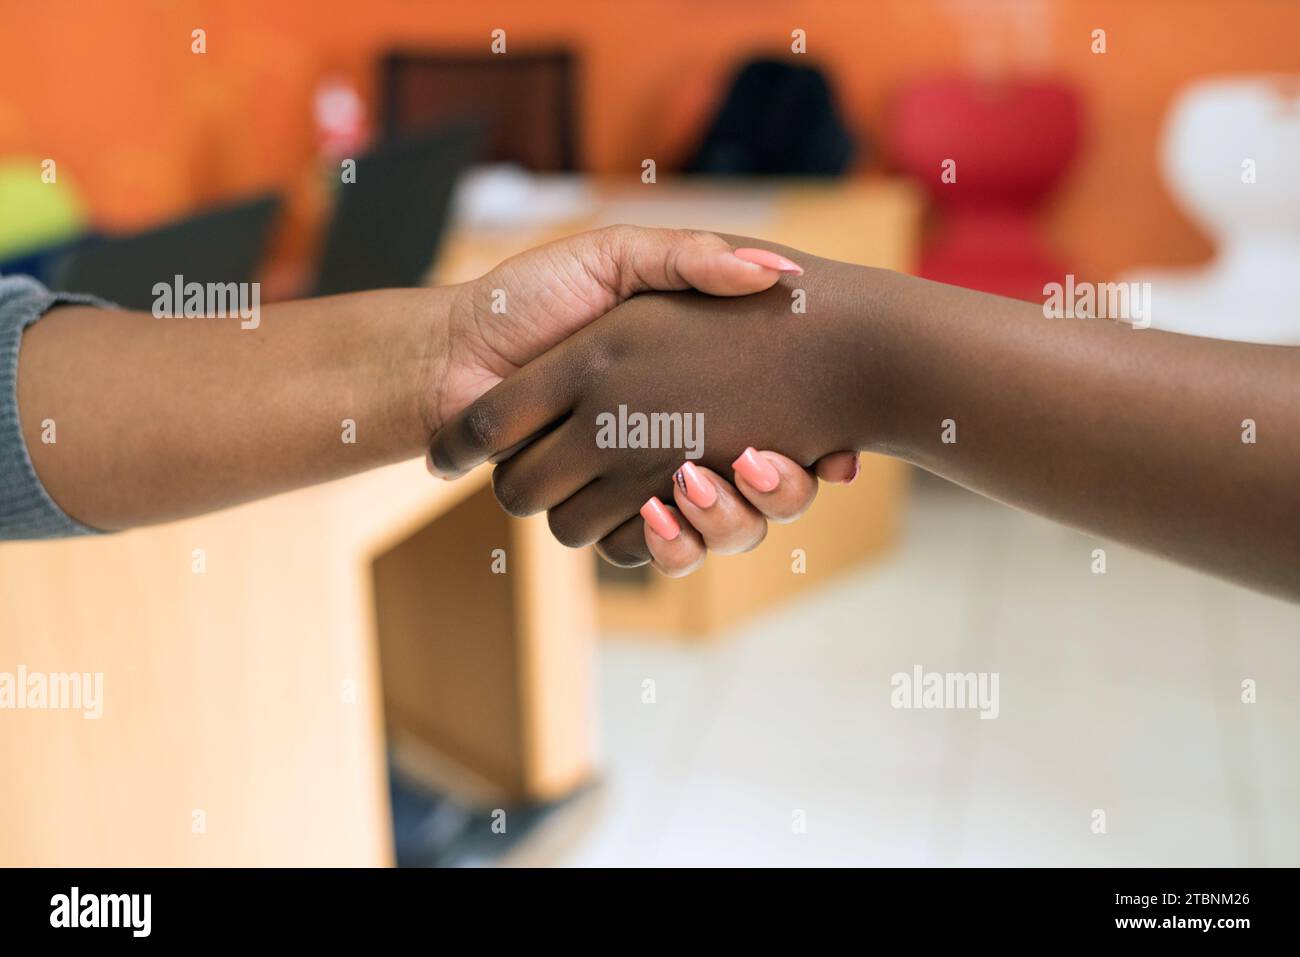 Handshake close view background. Business agreement, deal concept Stock Photo